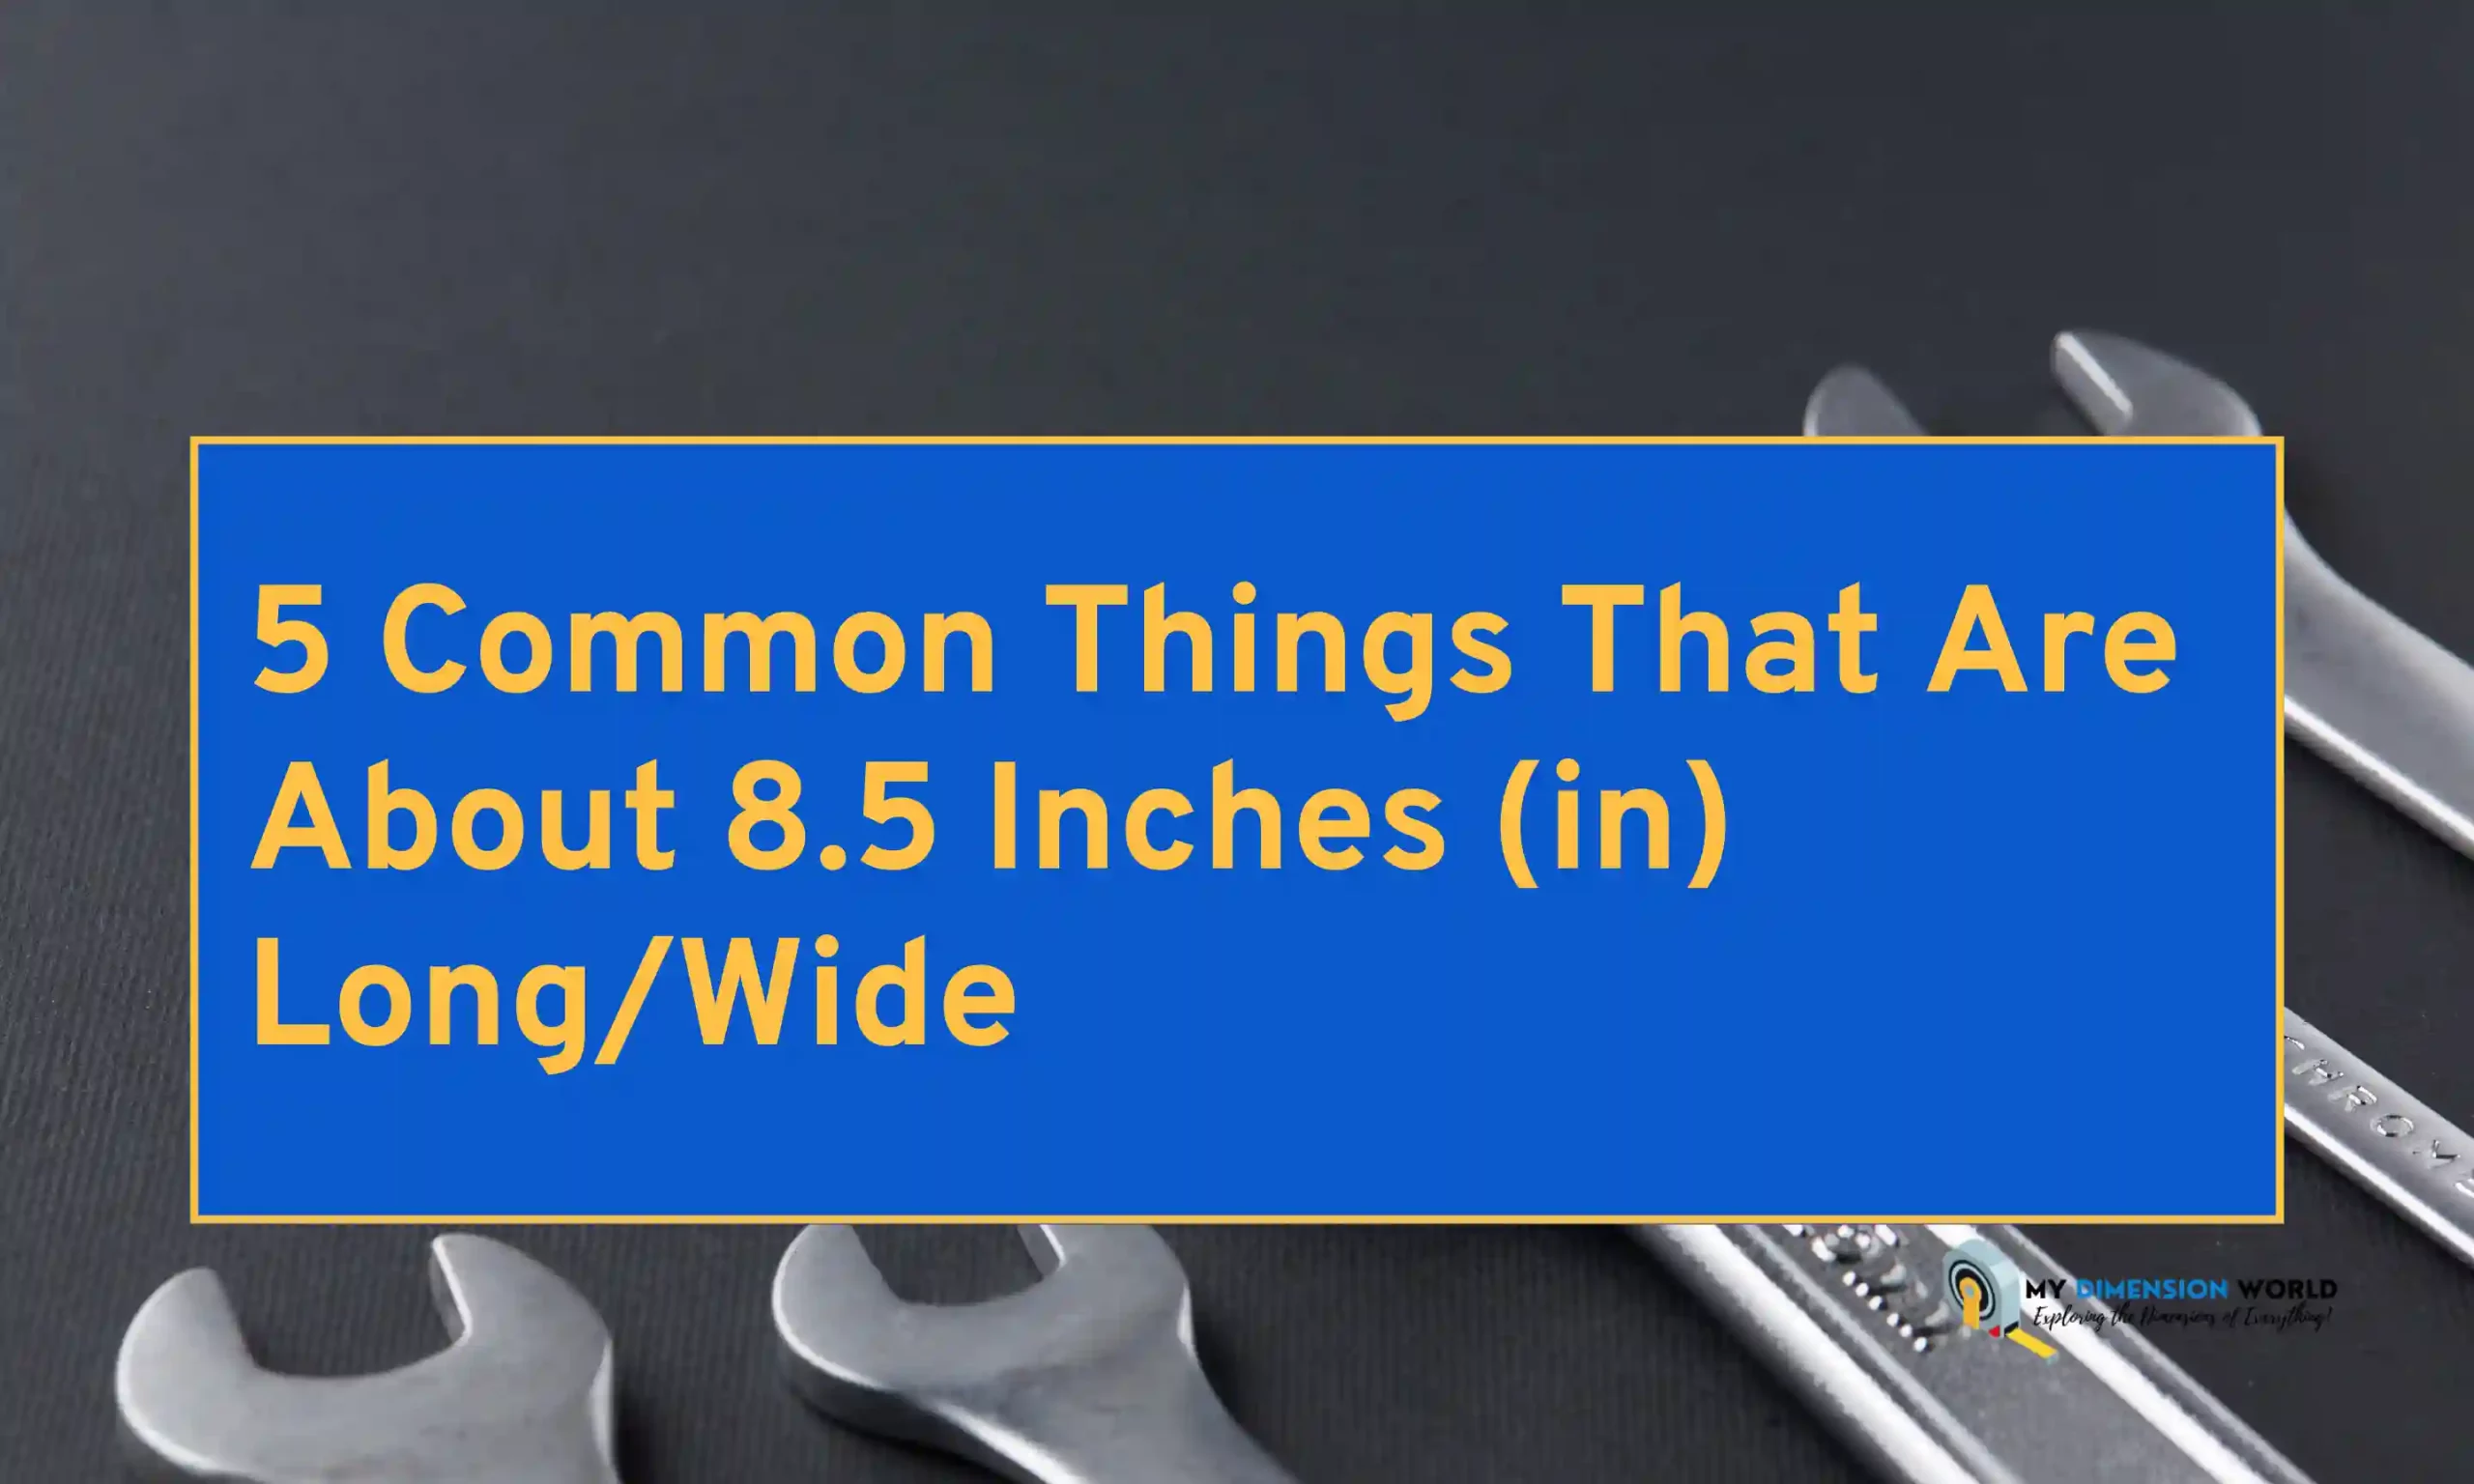 https://www.mydimensionworld.com/wp-content/uploads/2023/05/5-Common-Things-That-Are-About-8.5-Inches-in-LongWide-scaled.webp